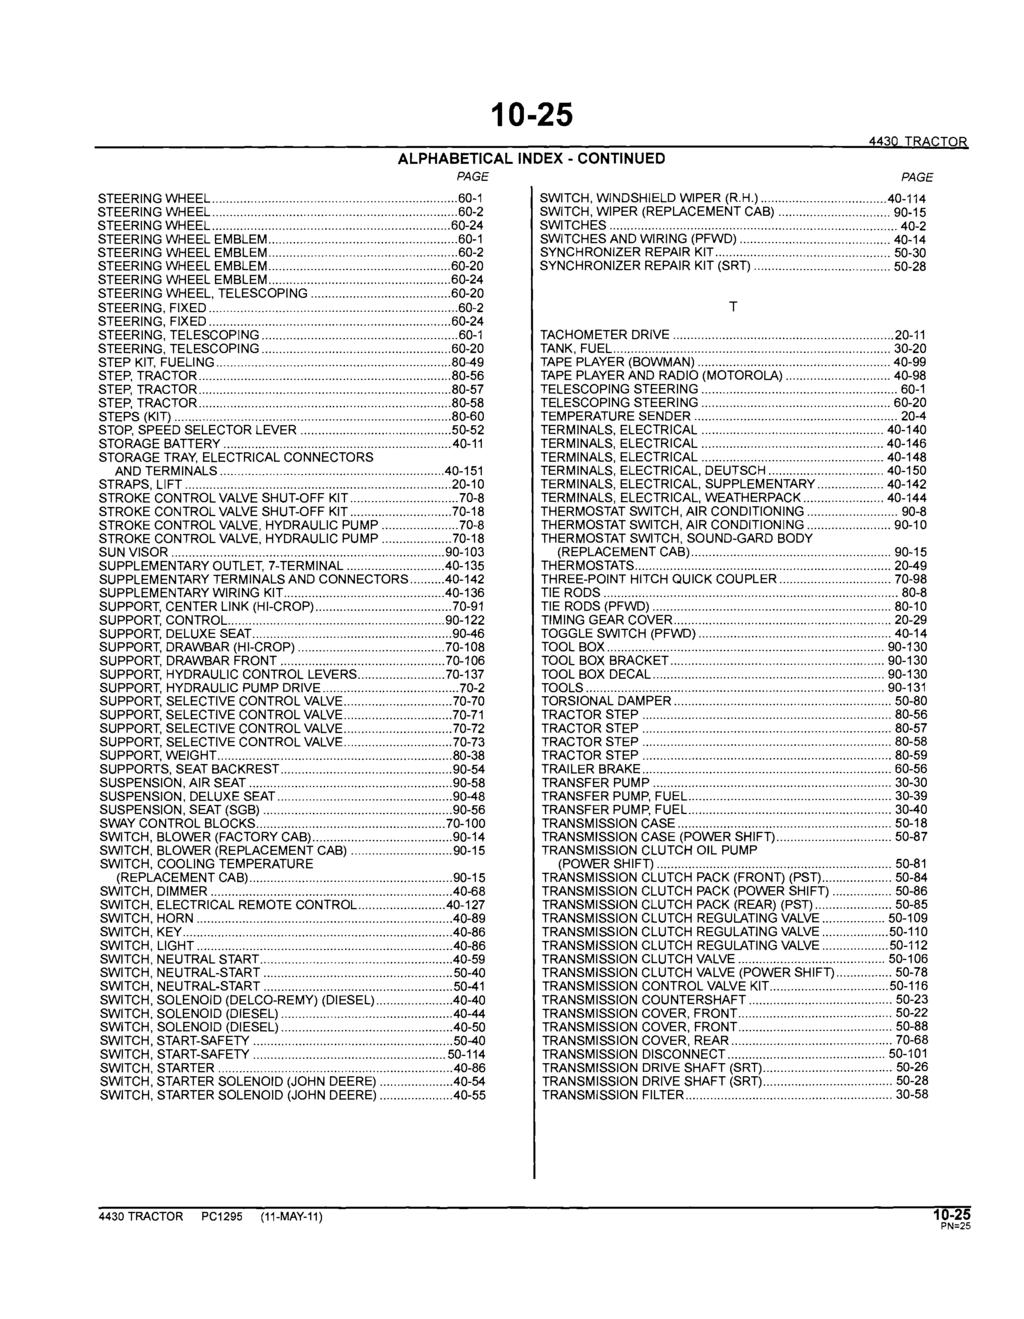 10-25 ALPHABETICAL INDEX - CONTINUED PAGE 4430 TRACTOR STEERING WHEEL... 60-1 SWITCH, WINDSHIELD WIPER (R.H.)...40-114 STEERING WHEEL... 60-2 SWITCH, WIPER (REPLACEMENT CAB)... 90-15 STEERING WHEEL.